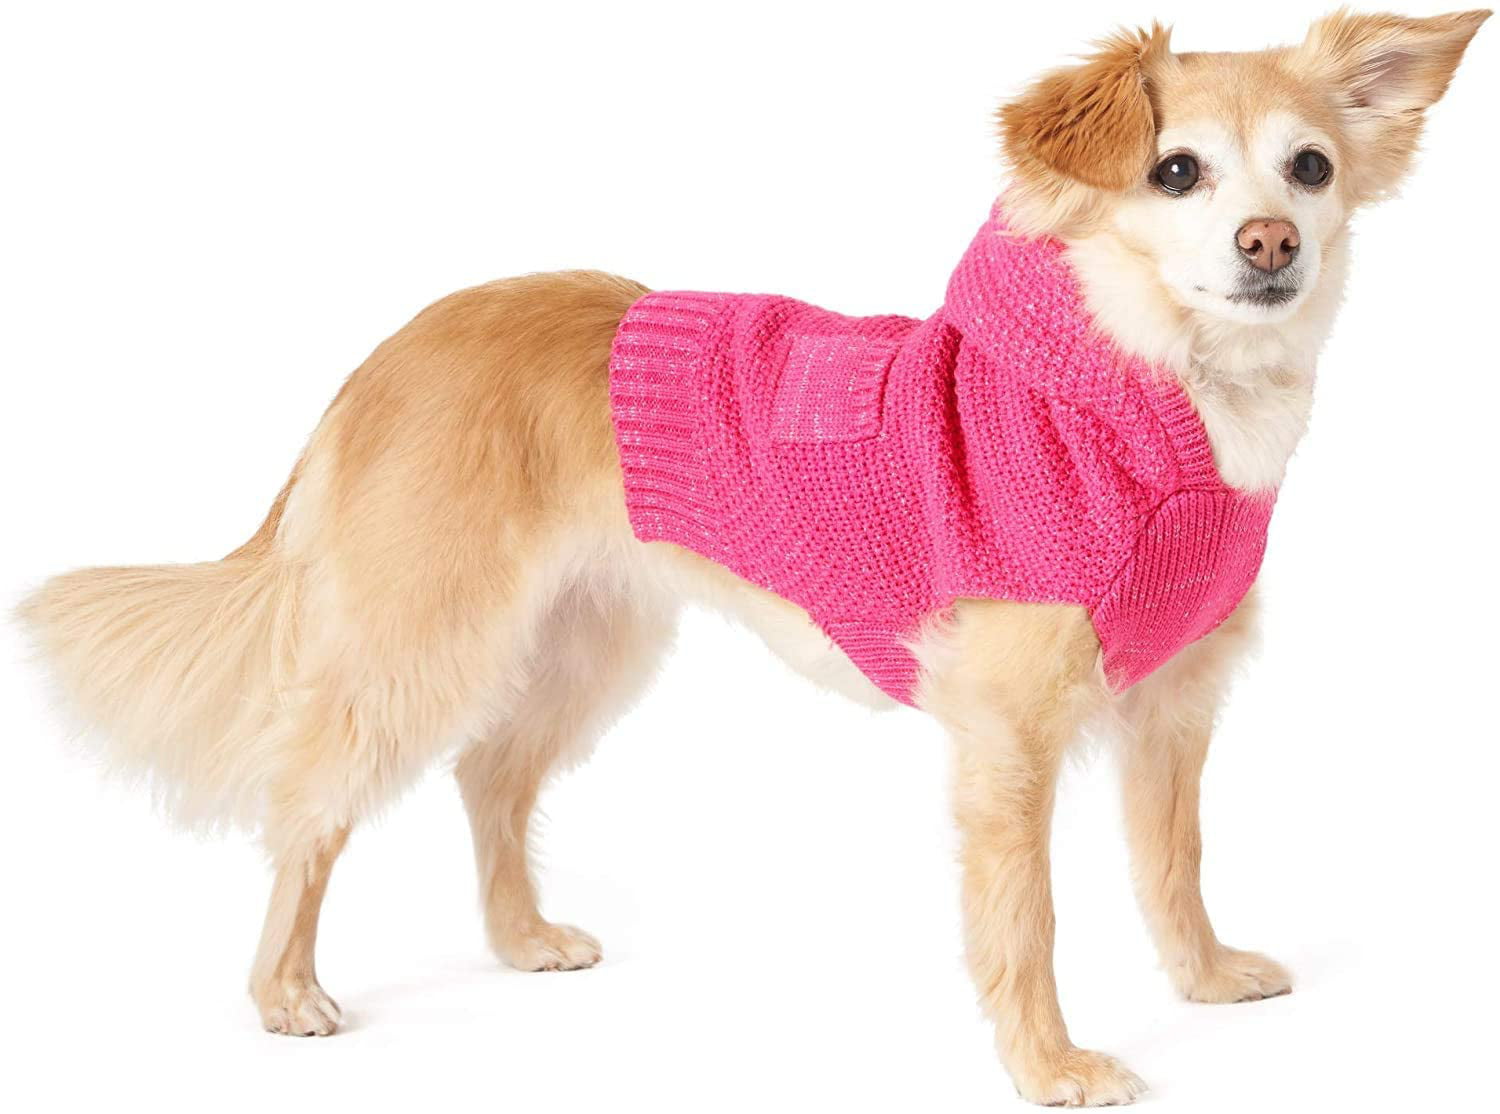 Cute Pet Sweatshirt Jacket for Cold Wheather for Small Medium Dog Cat Clothes Apparel Super Soft Fleece Dog Winter Warm Coat YAODHAOD Dog Sweater 